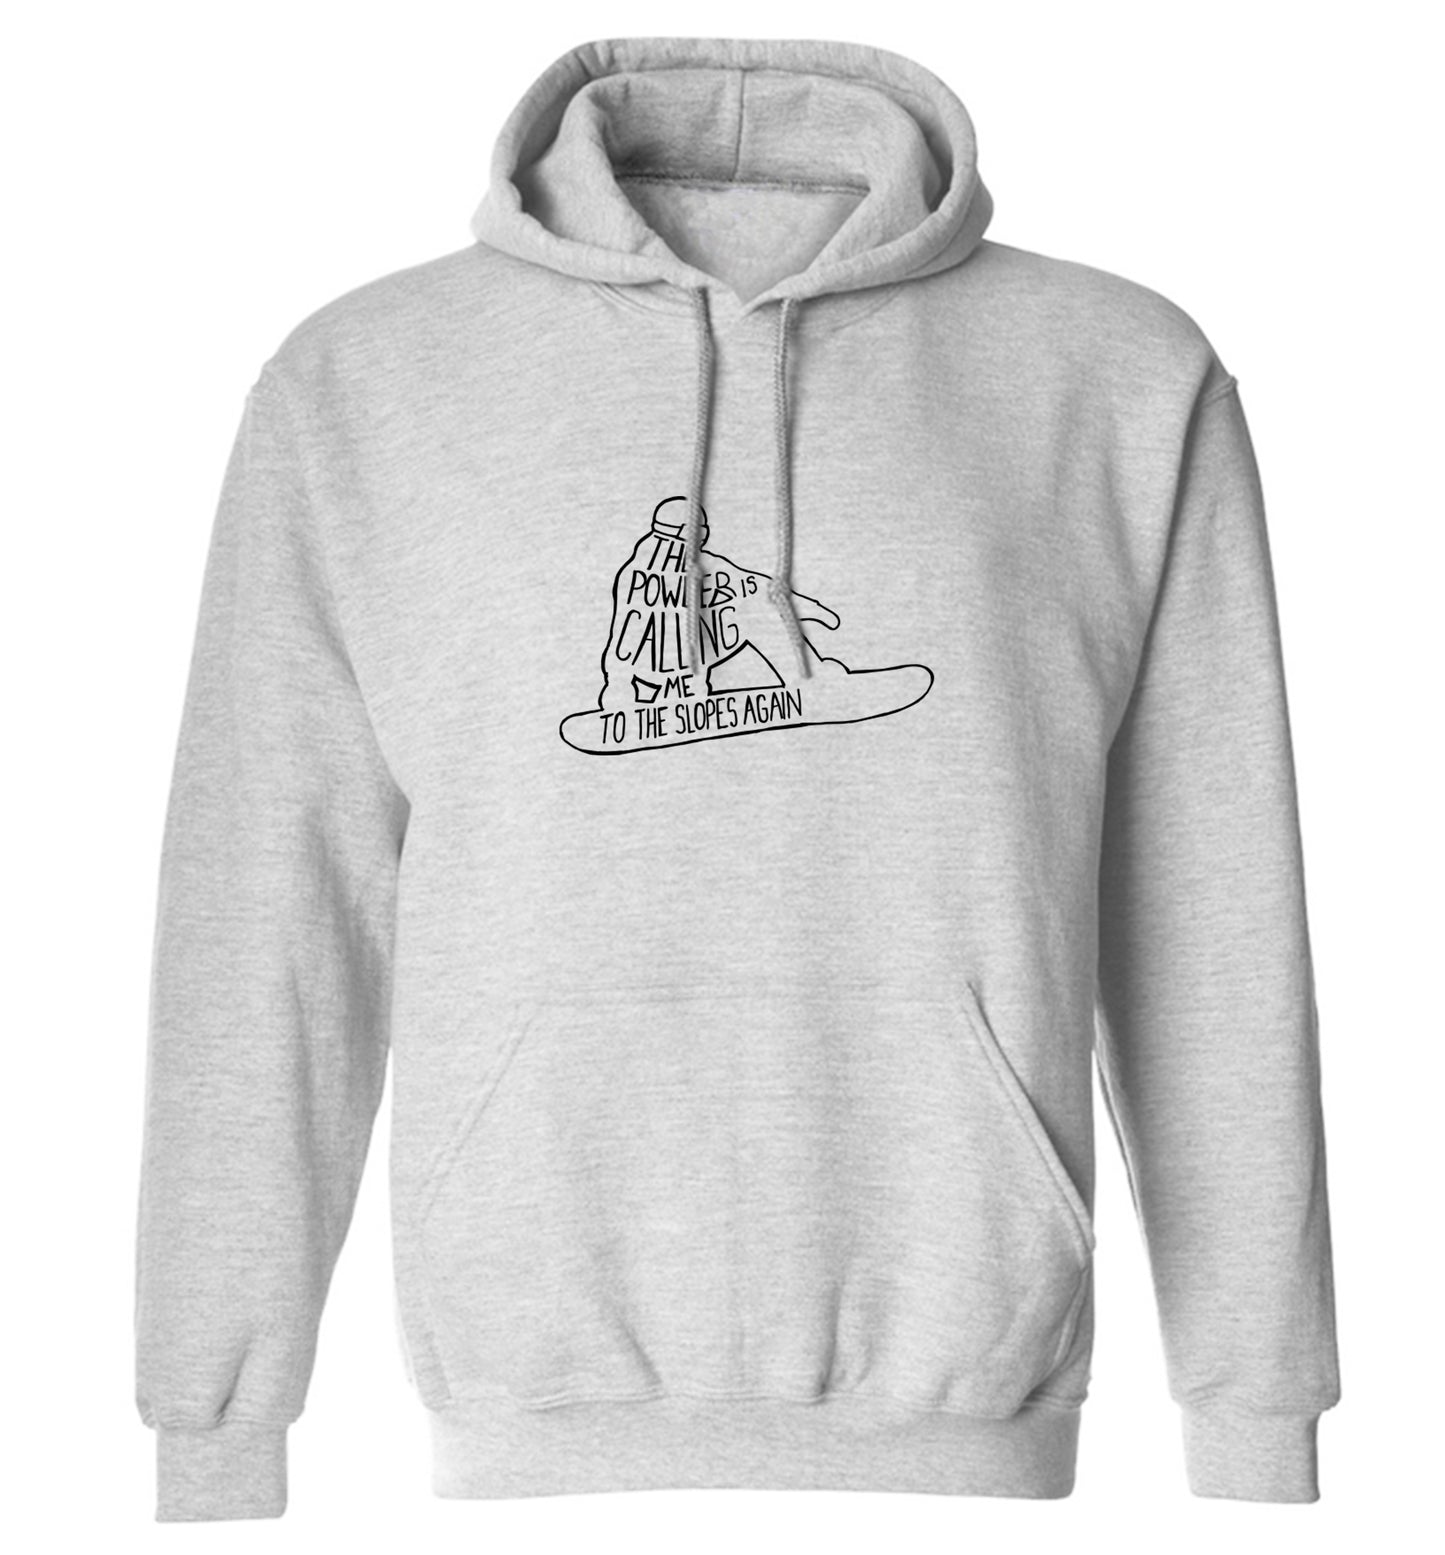 The powder is calling me to the slopes again adults unisex grey hoodie 2XL